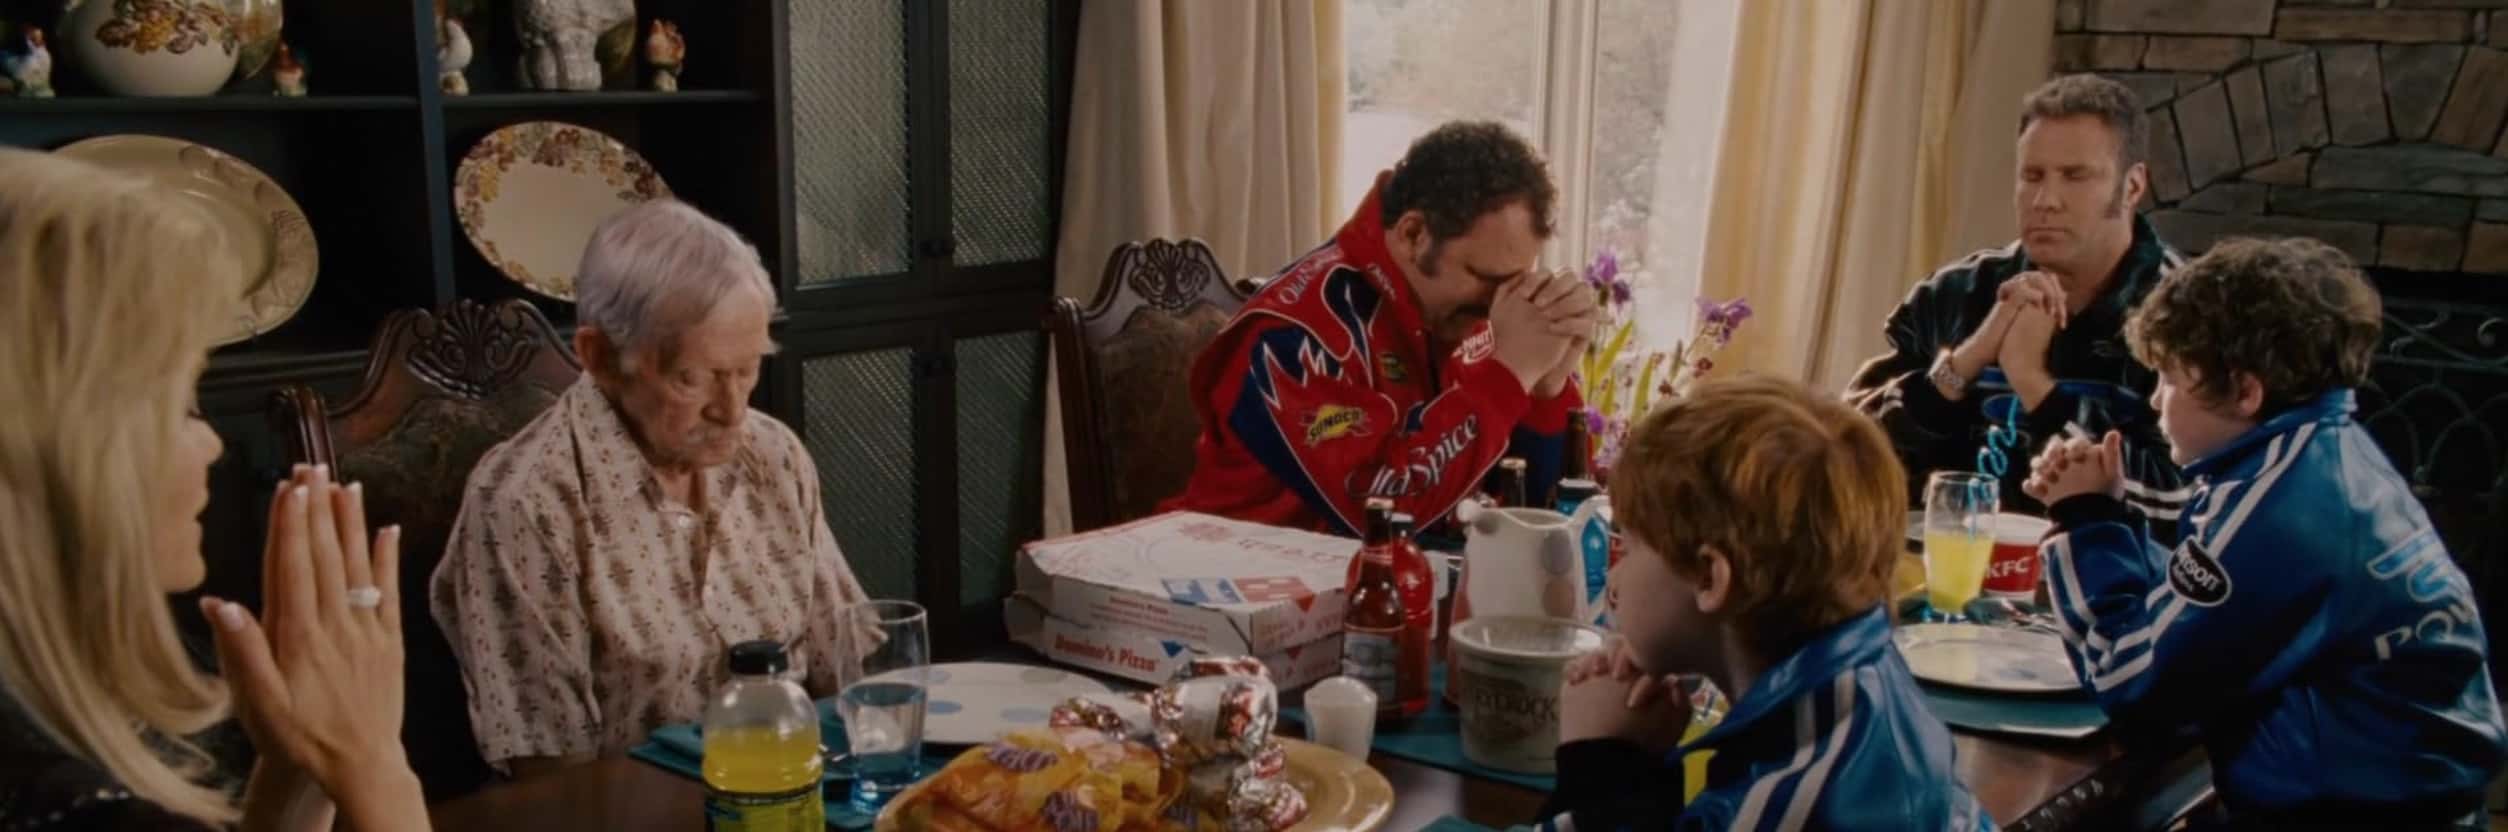 A family sits at a table filled with various fast-food items in this image from Columbia Pictures.